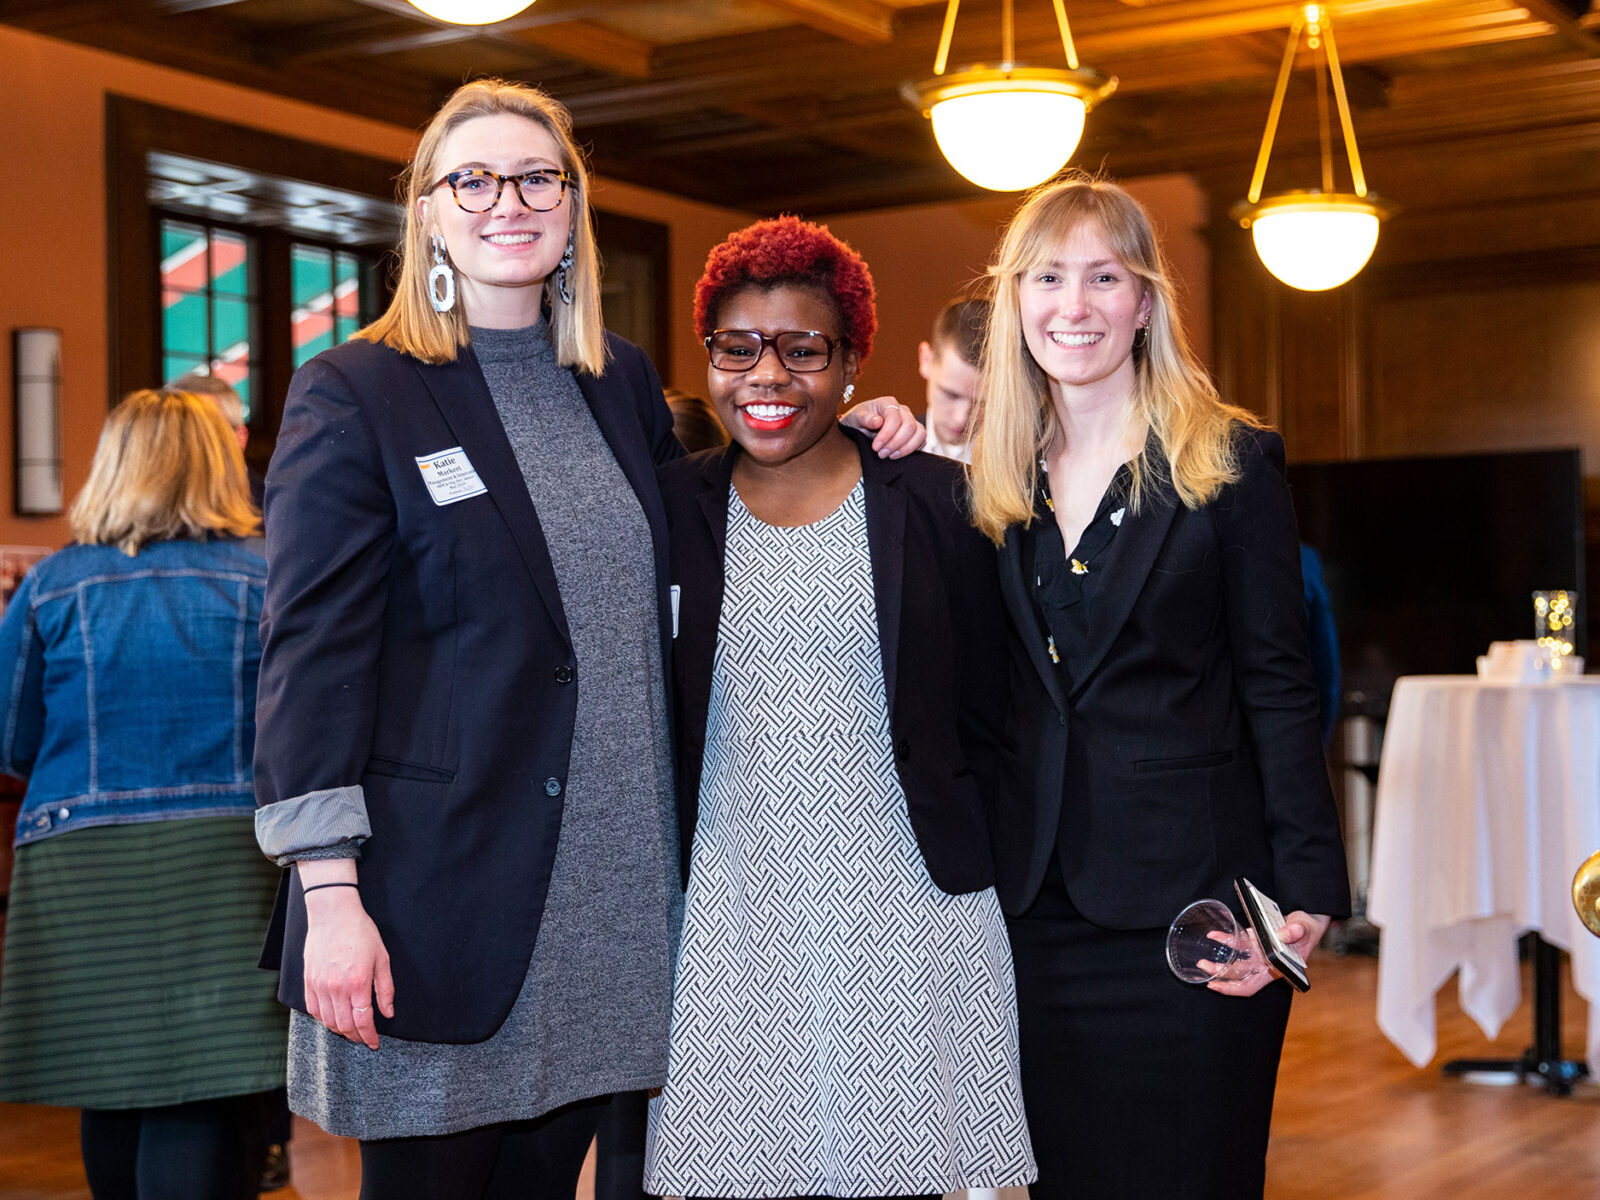 three students stand up posing for a photo with their arms around each other at a networking event